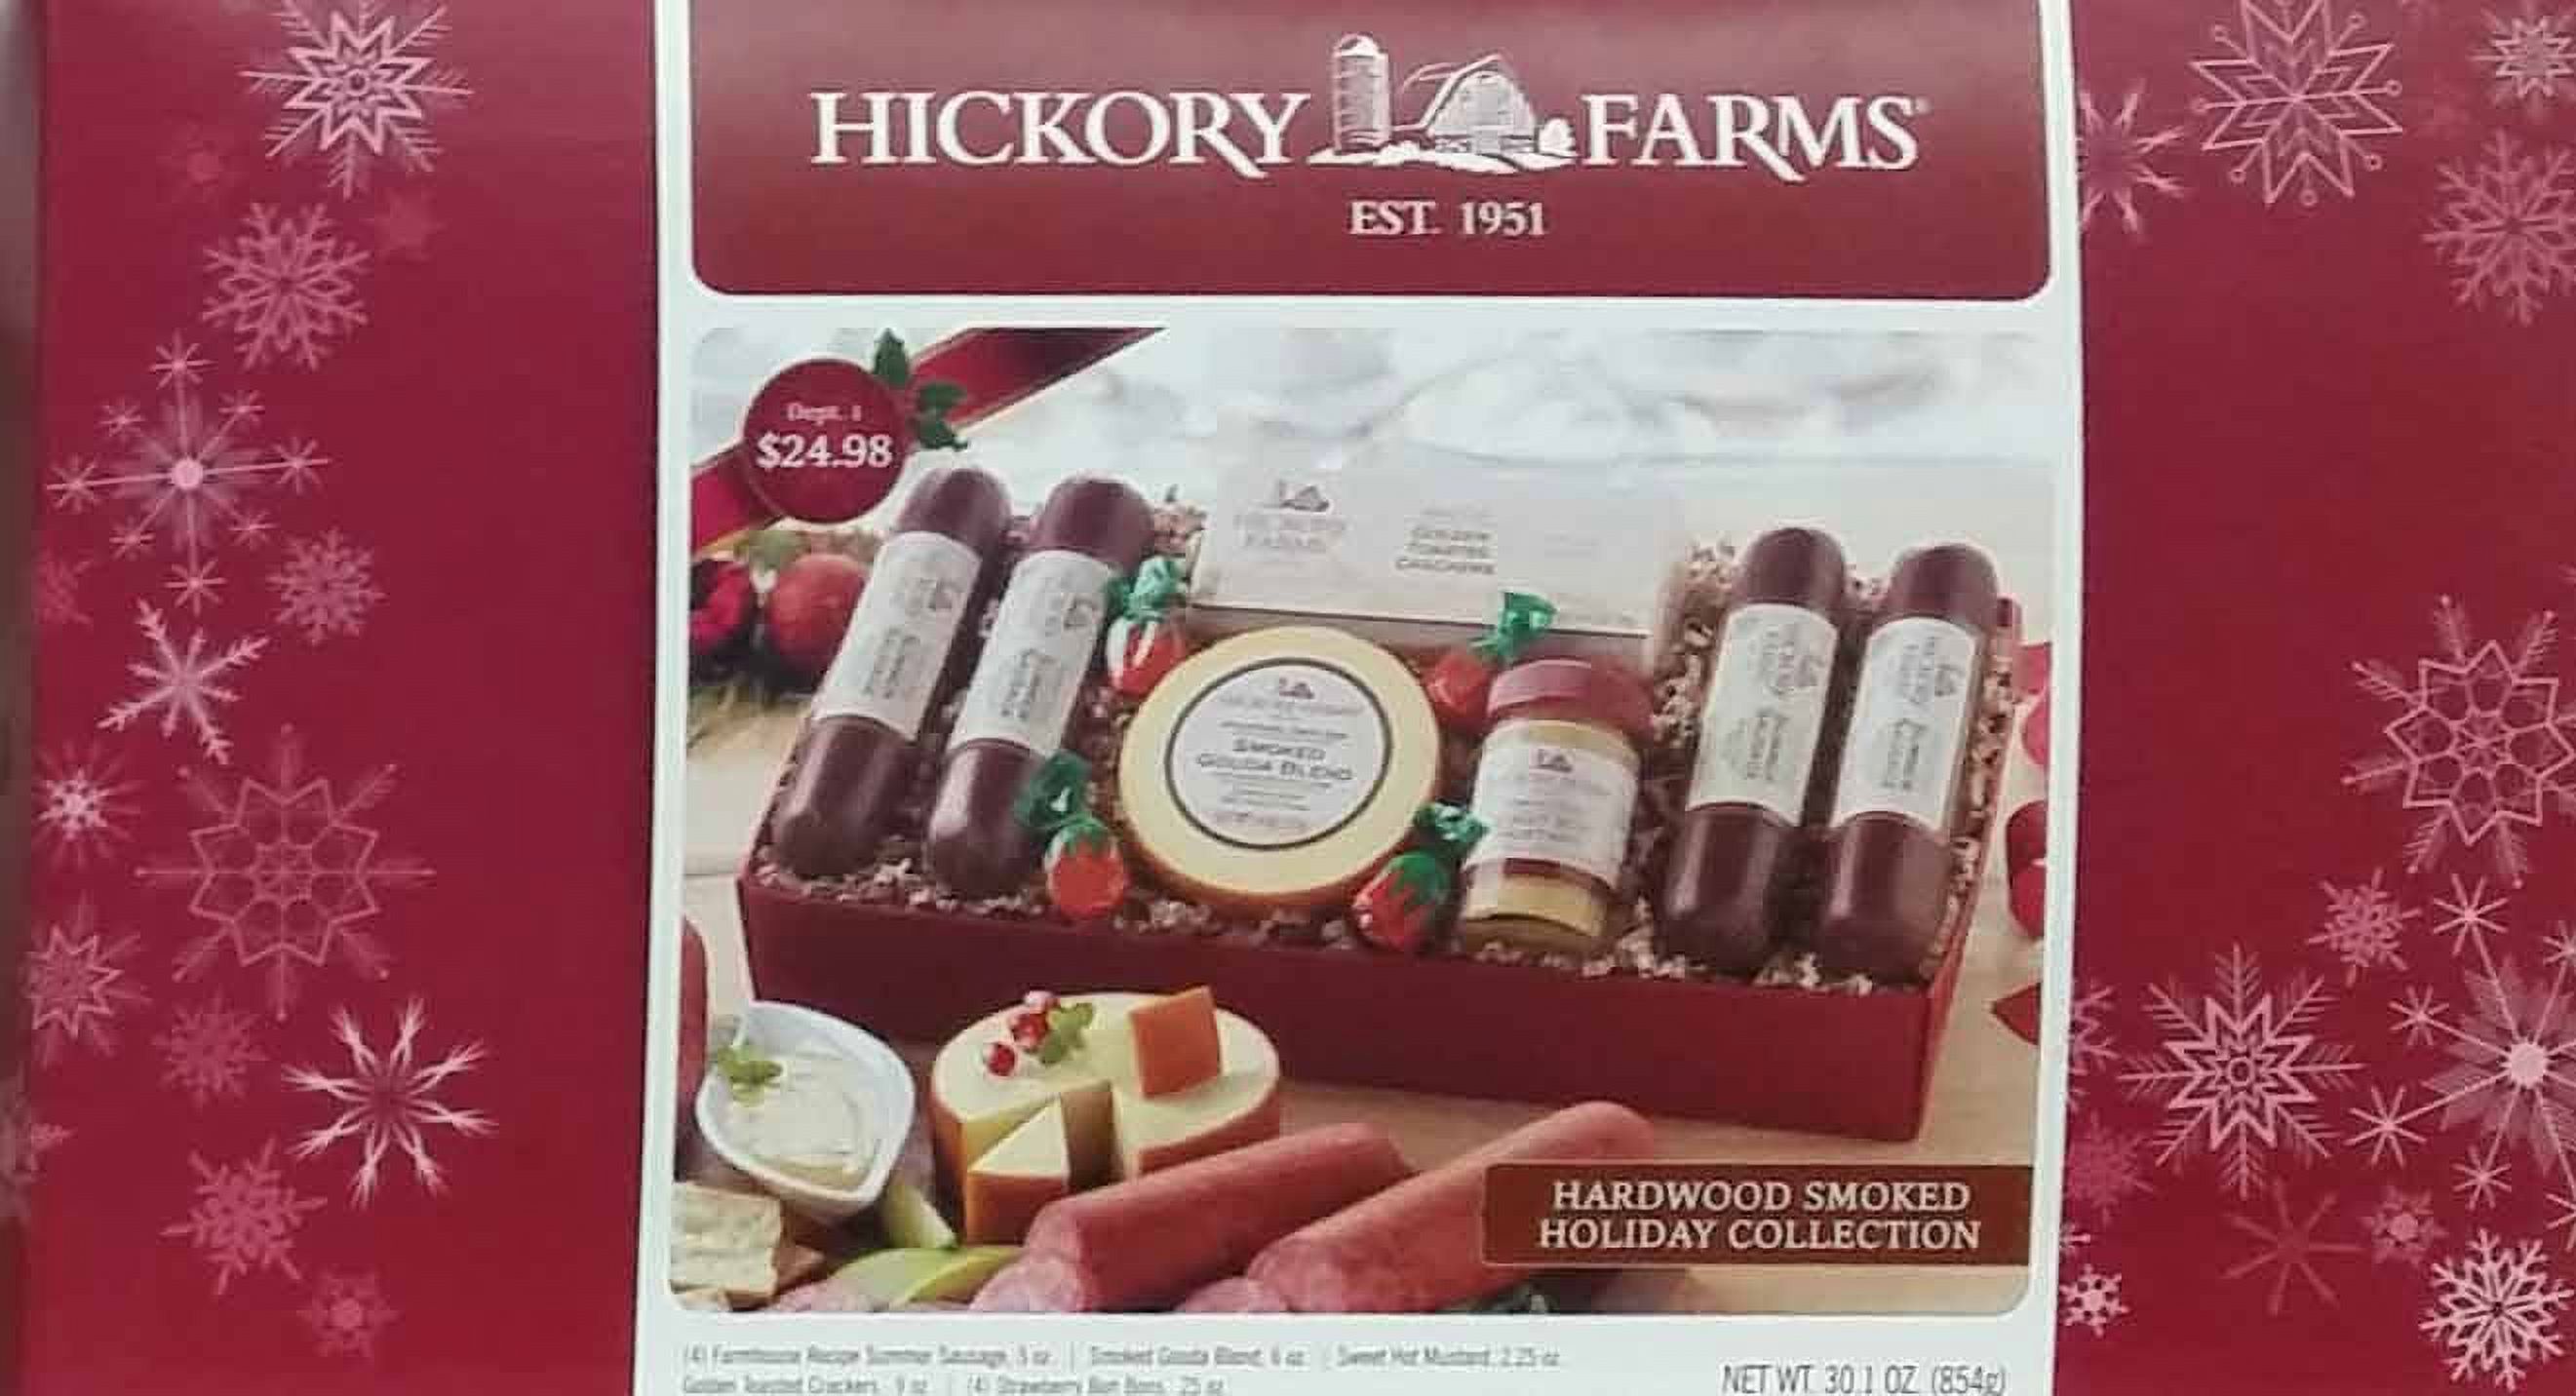 Hickory Farms Hardwood Smoked Holiday Collection Gift Set, 11 Pieces - image 2 of 2